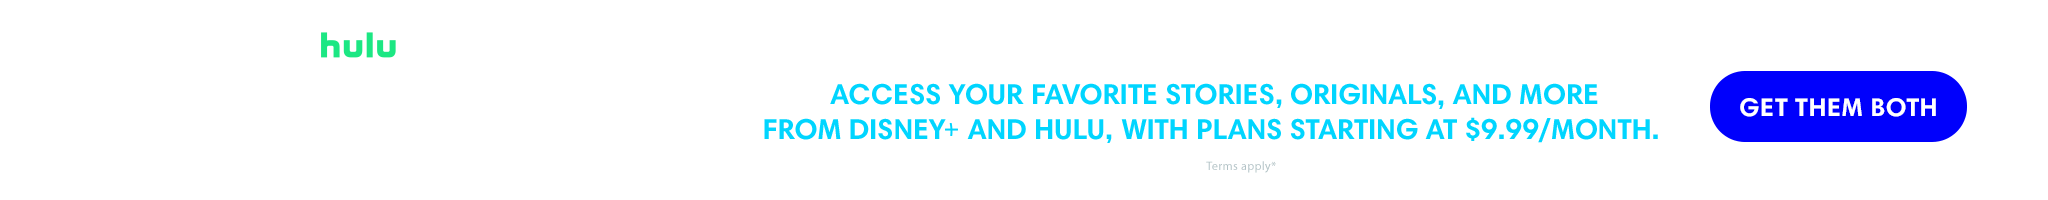 Access your favorite stories, Originals, and more from Disney+ and Hulu, with plans starting at $9.99/month. | Get them both. | Terms apply*